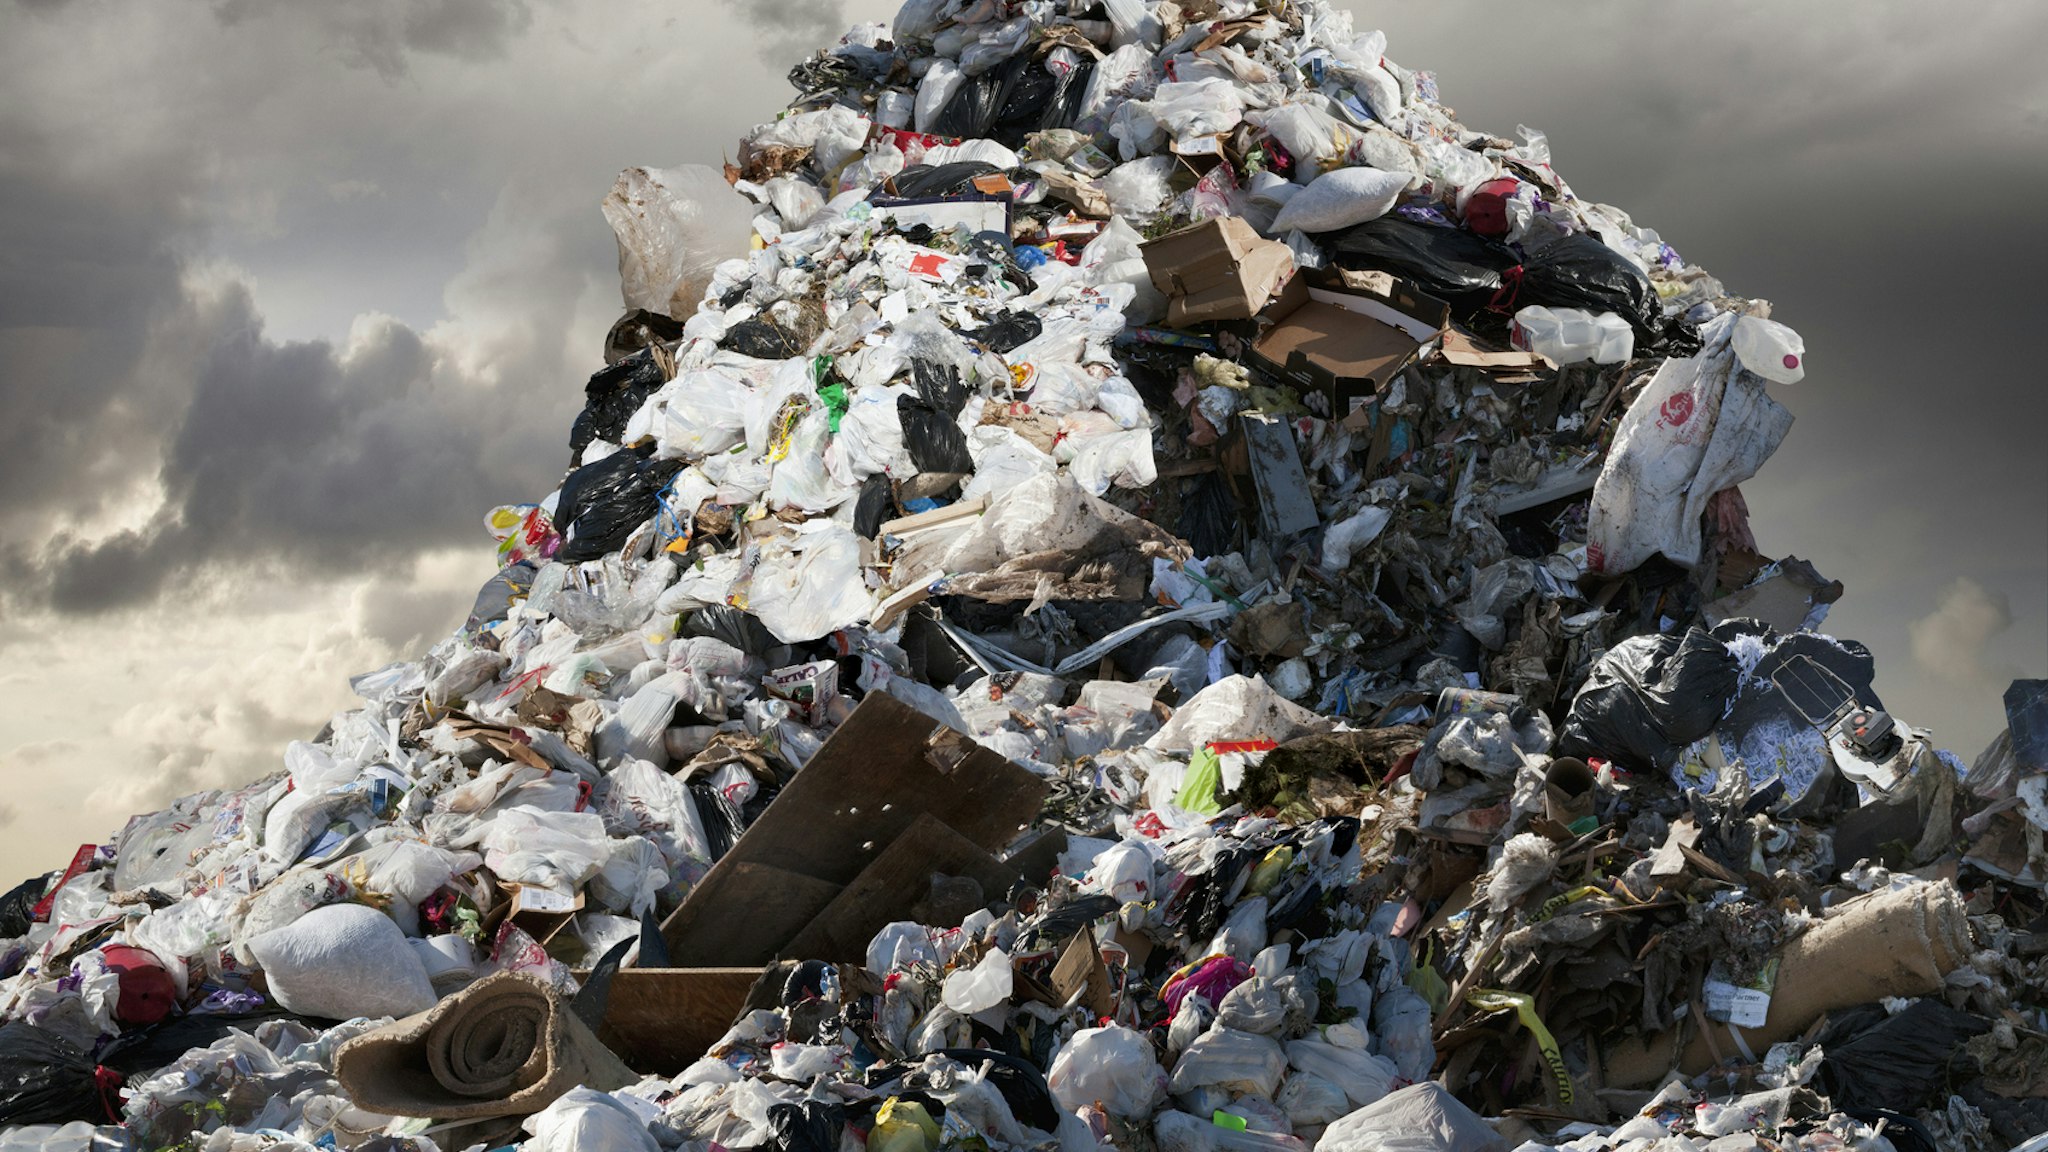 A Mountain of Garbage Looms Above - stock photo